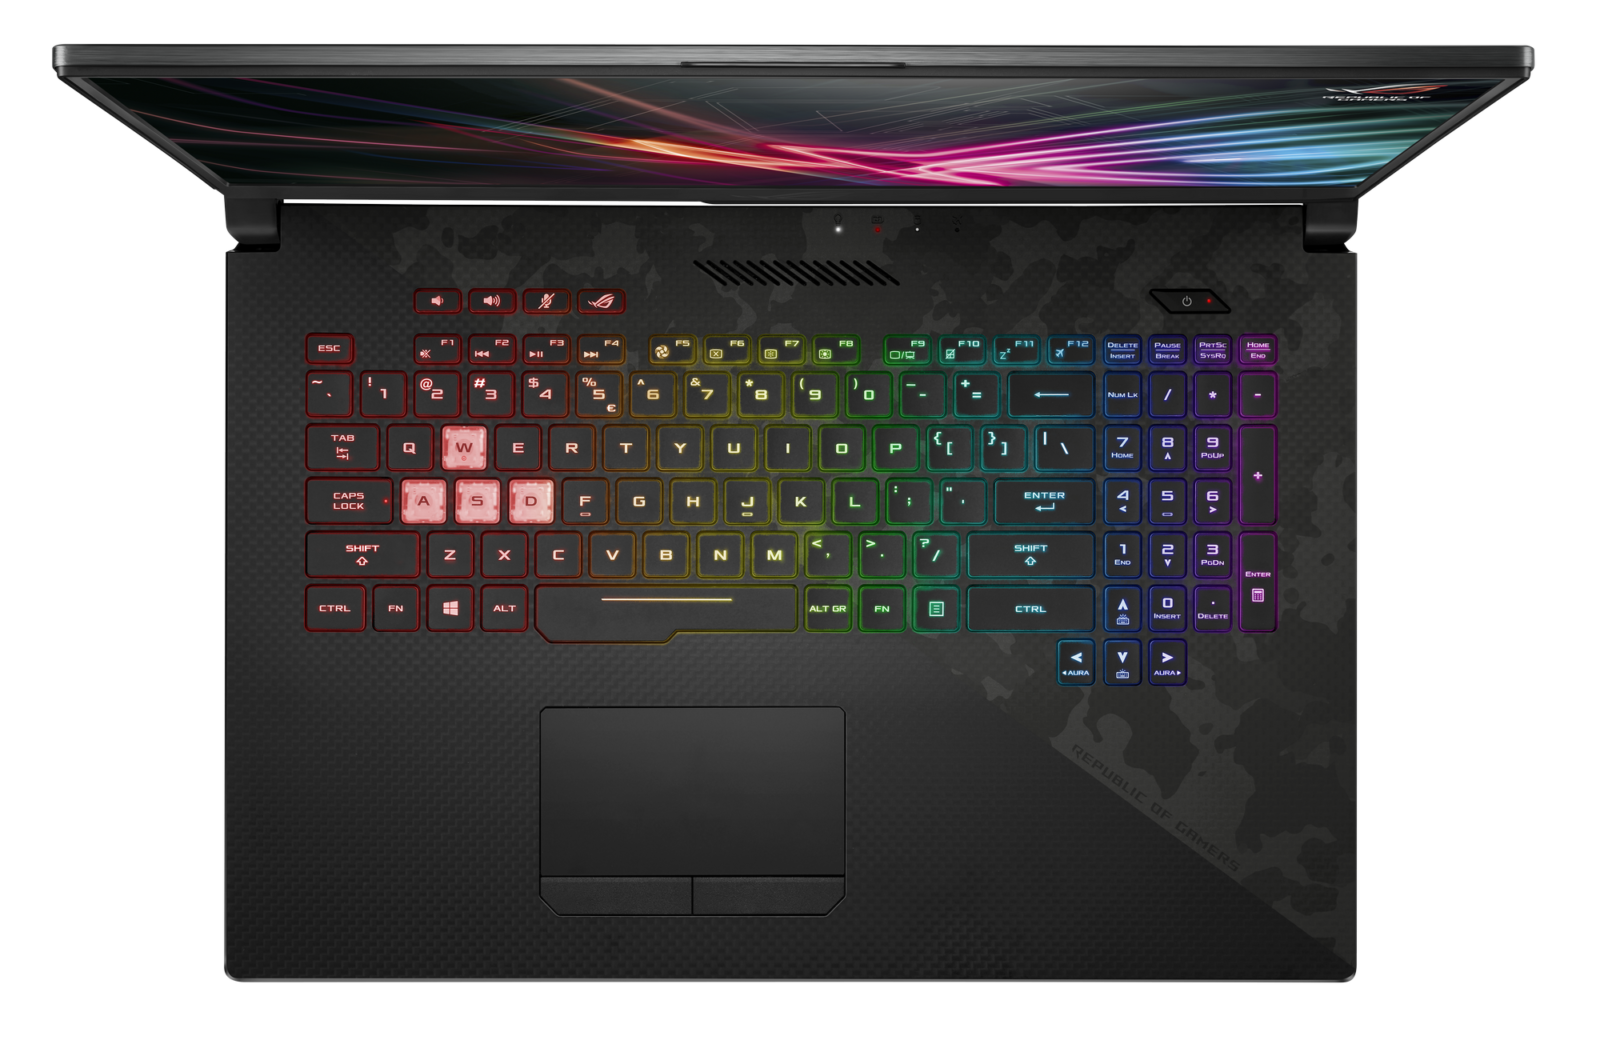 Asus Launches Strix SCAR II - Insight Trending